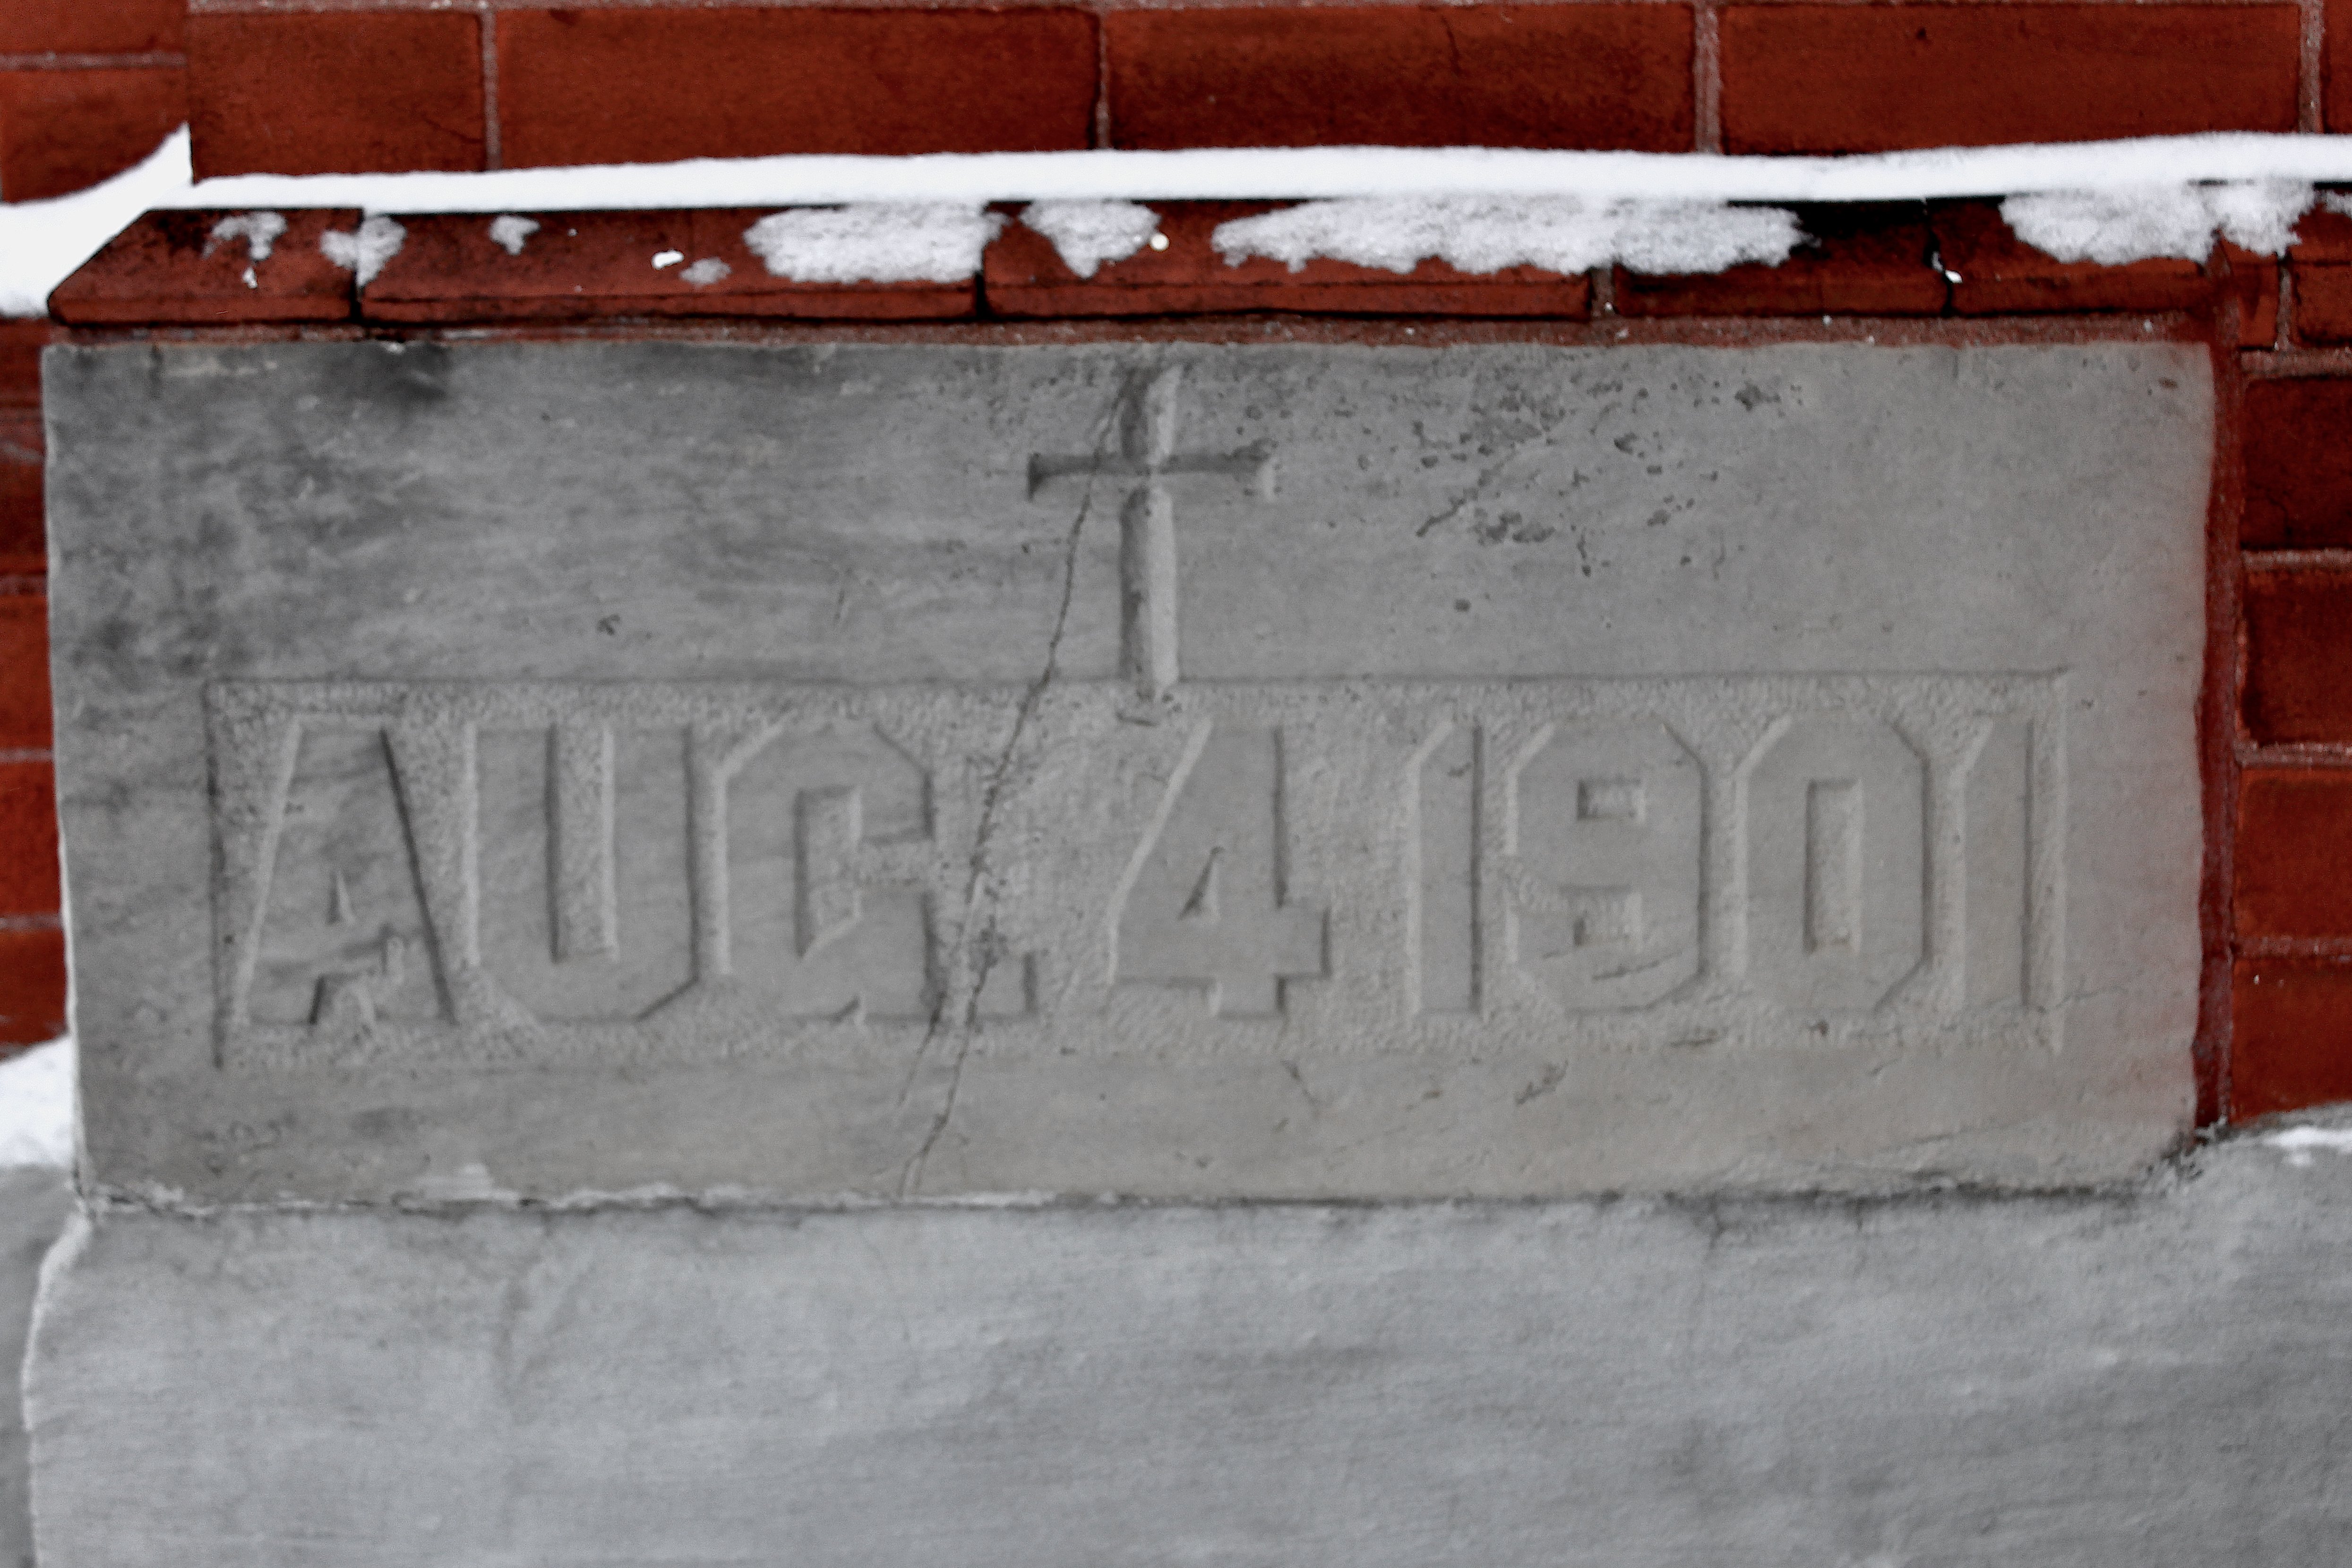 Corner stone of the church dating the building of the church as August 4, 1901